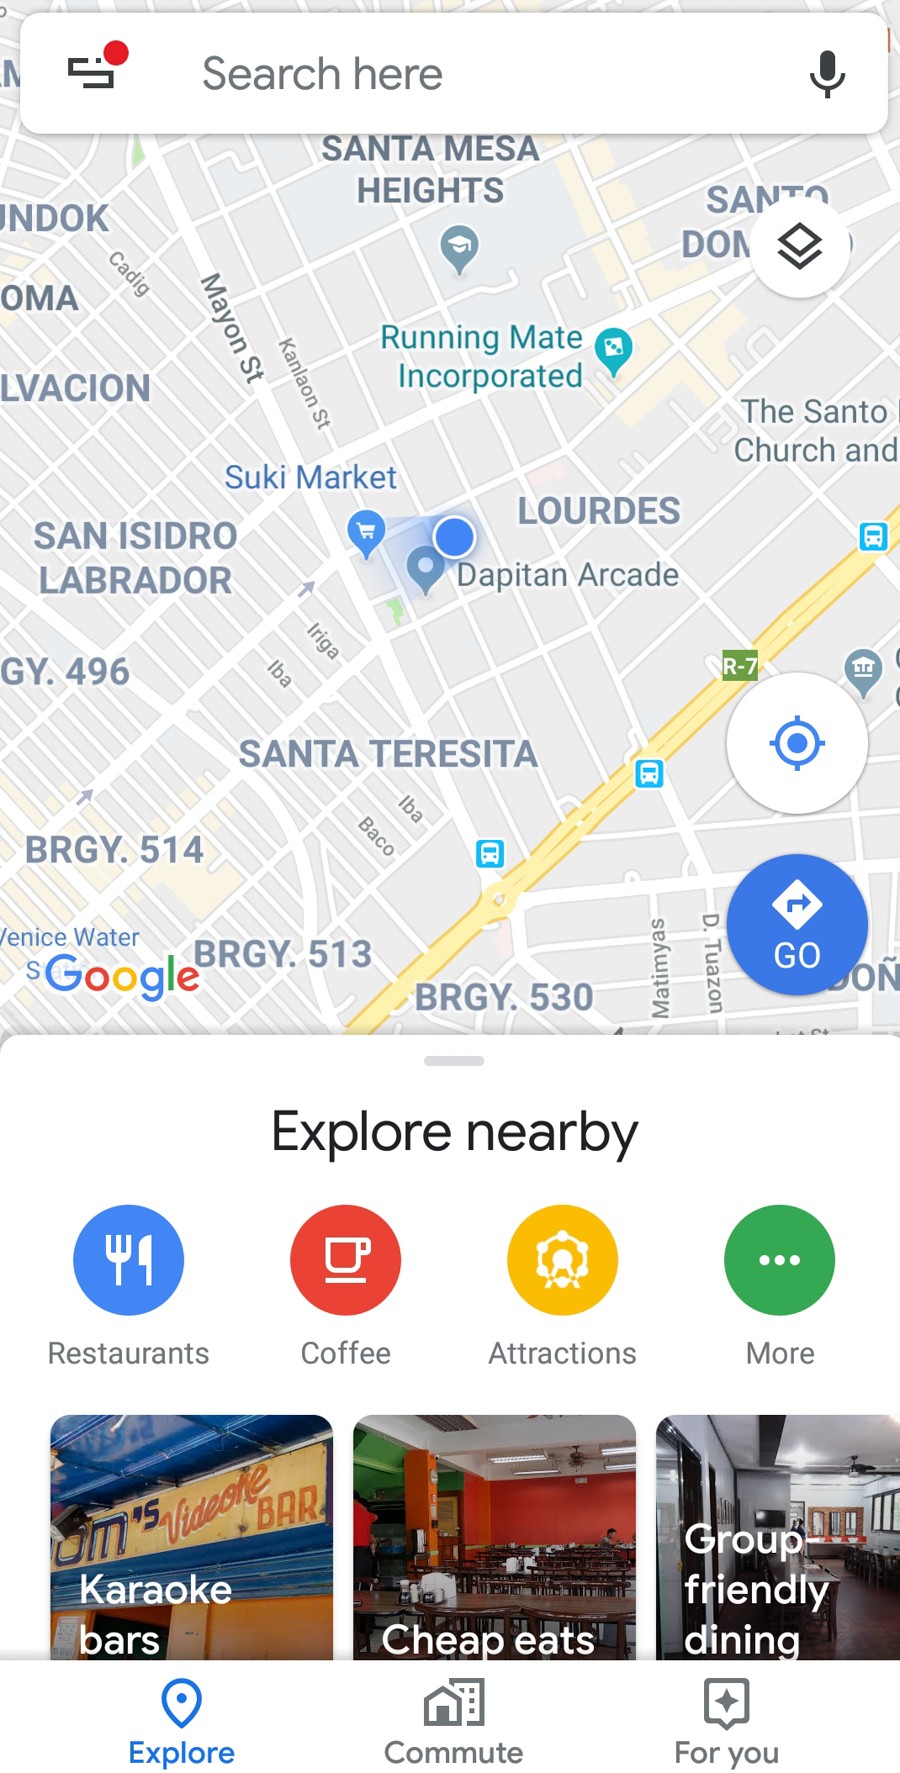 Yes, You Can Play Snake on the Google Maps App - UNBOX PH